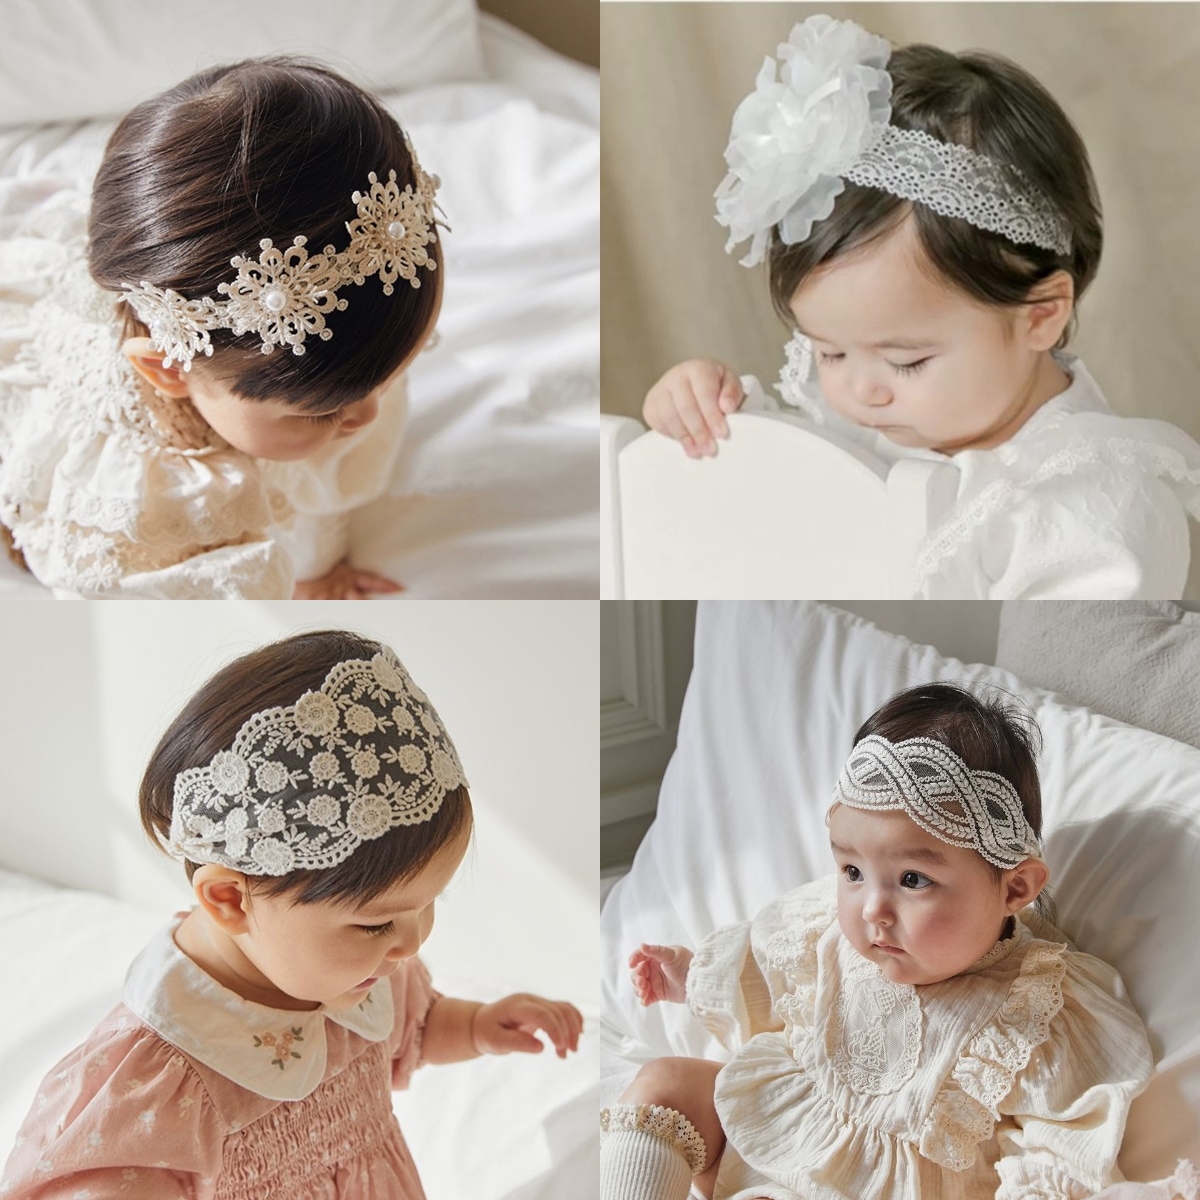 

Baby Girls Adorable Cute Flowers Lace Headband Hairband Summer Decorative Hair Accessories